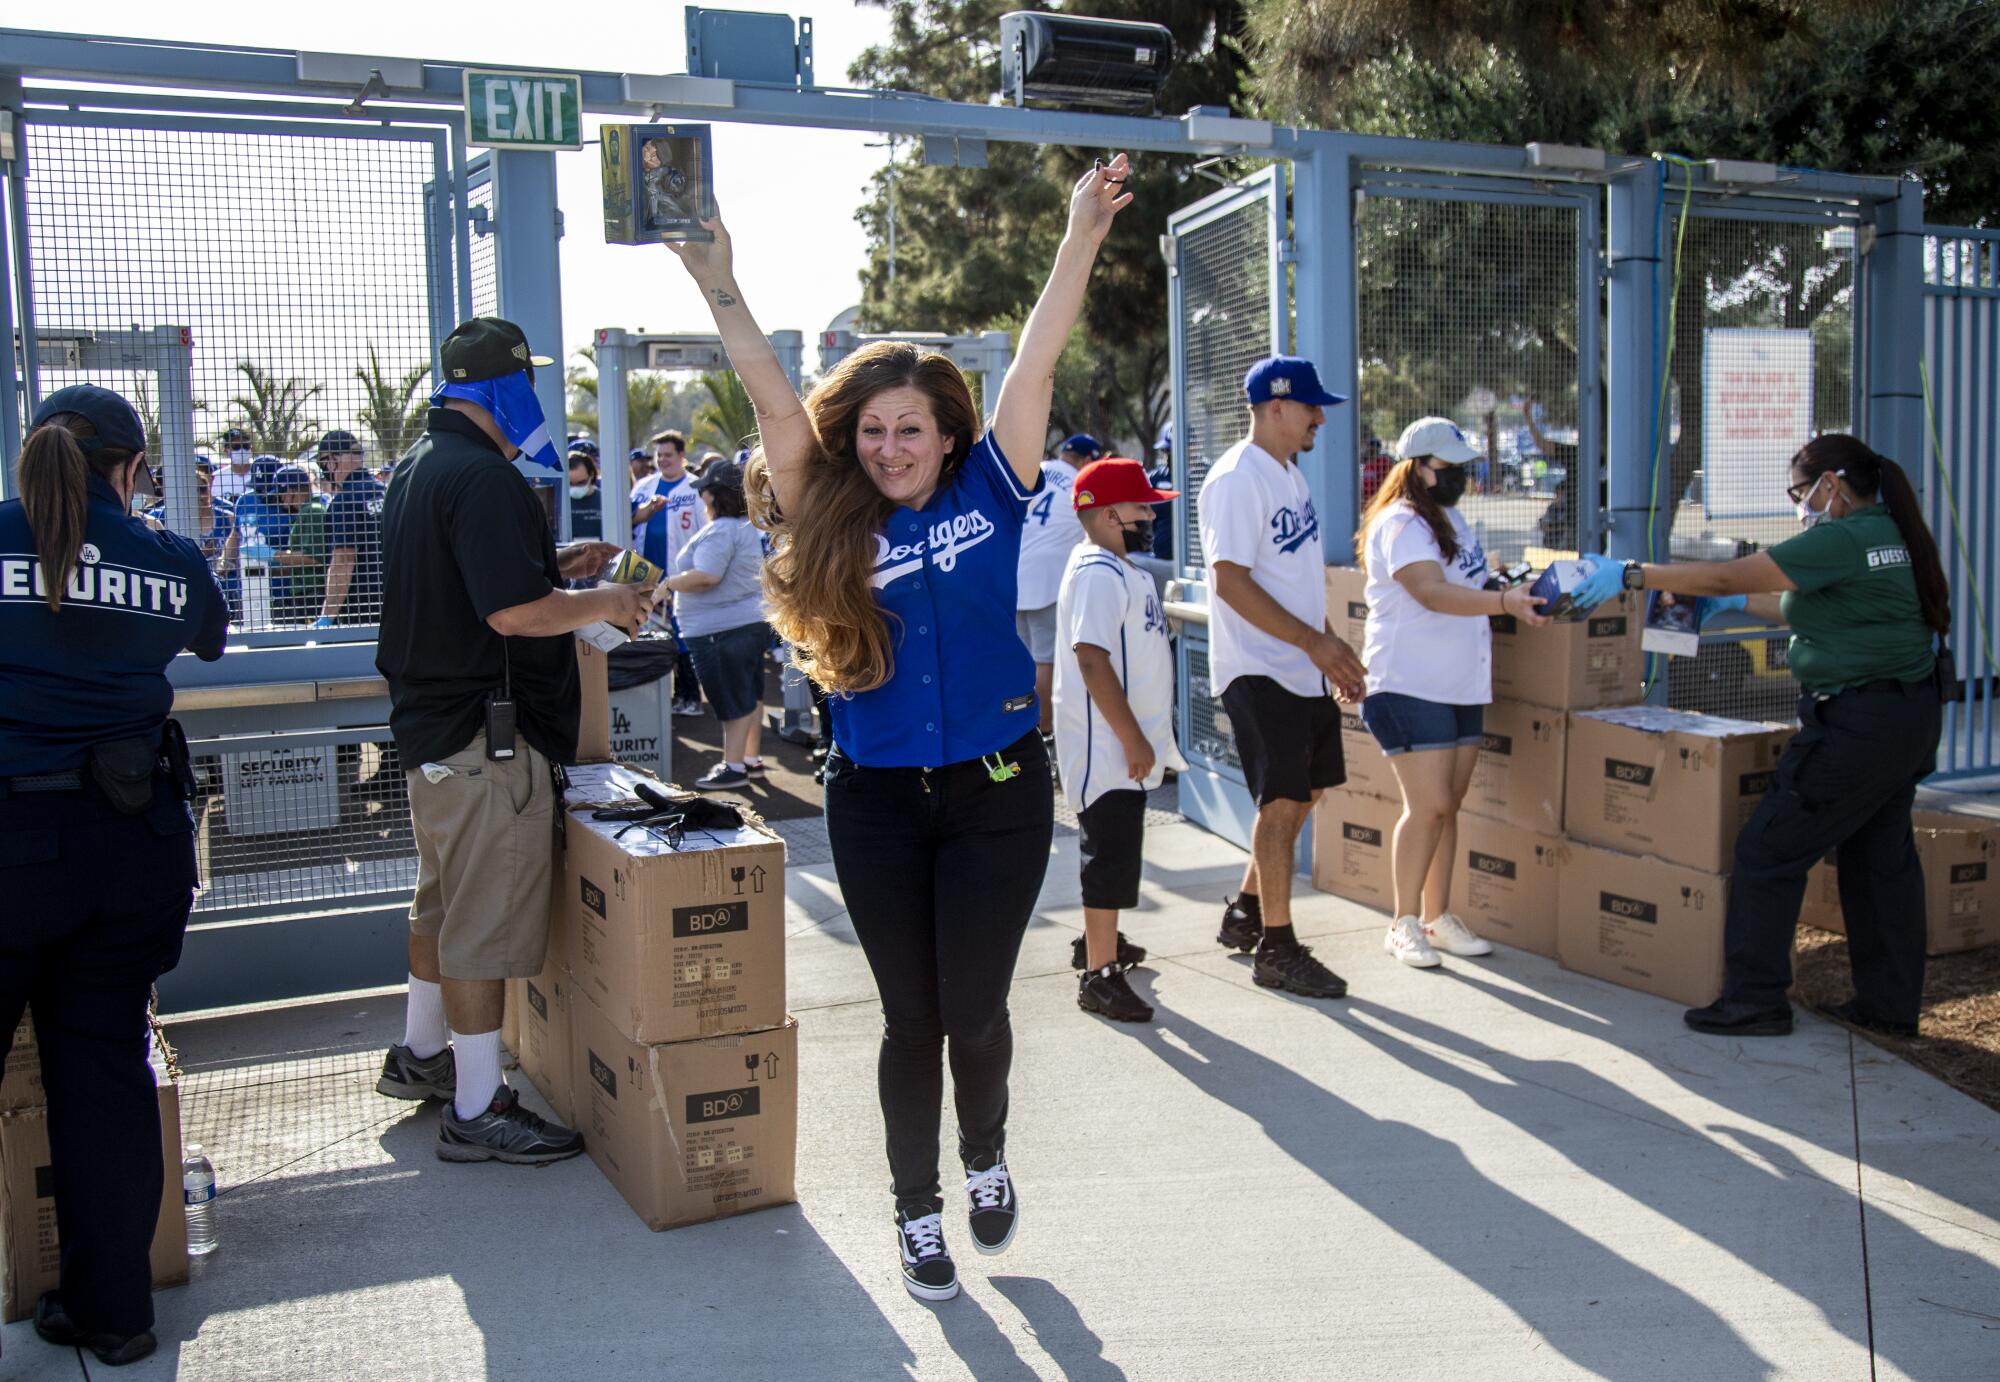 A woman in a Dodgers shirt raises her arms 